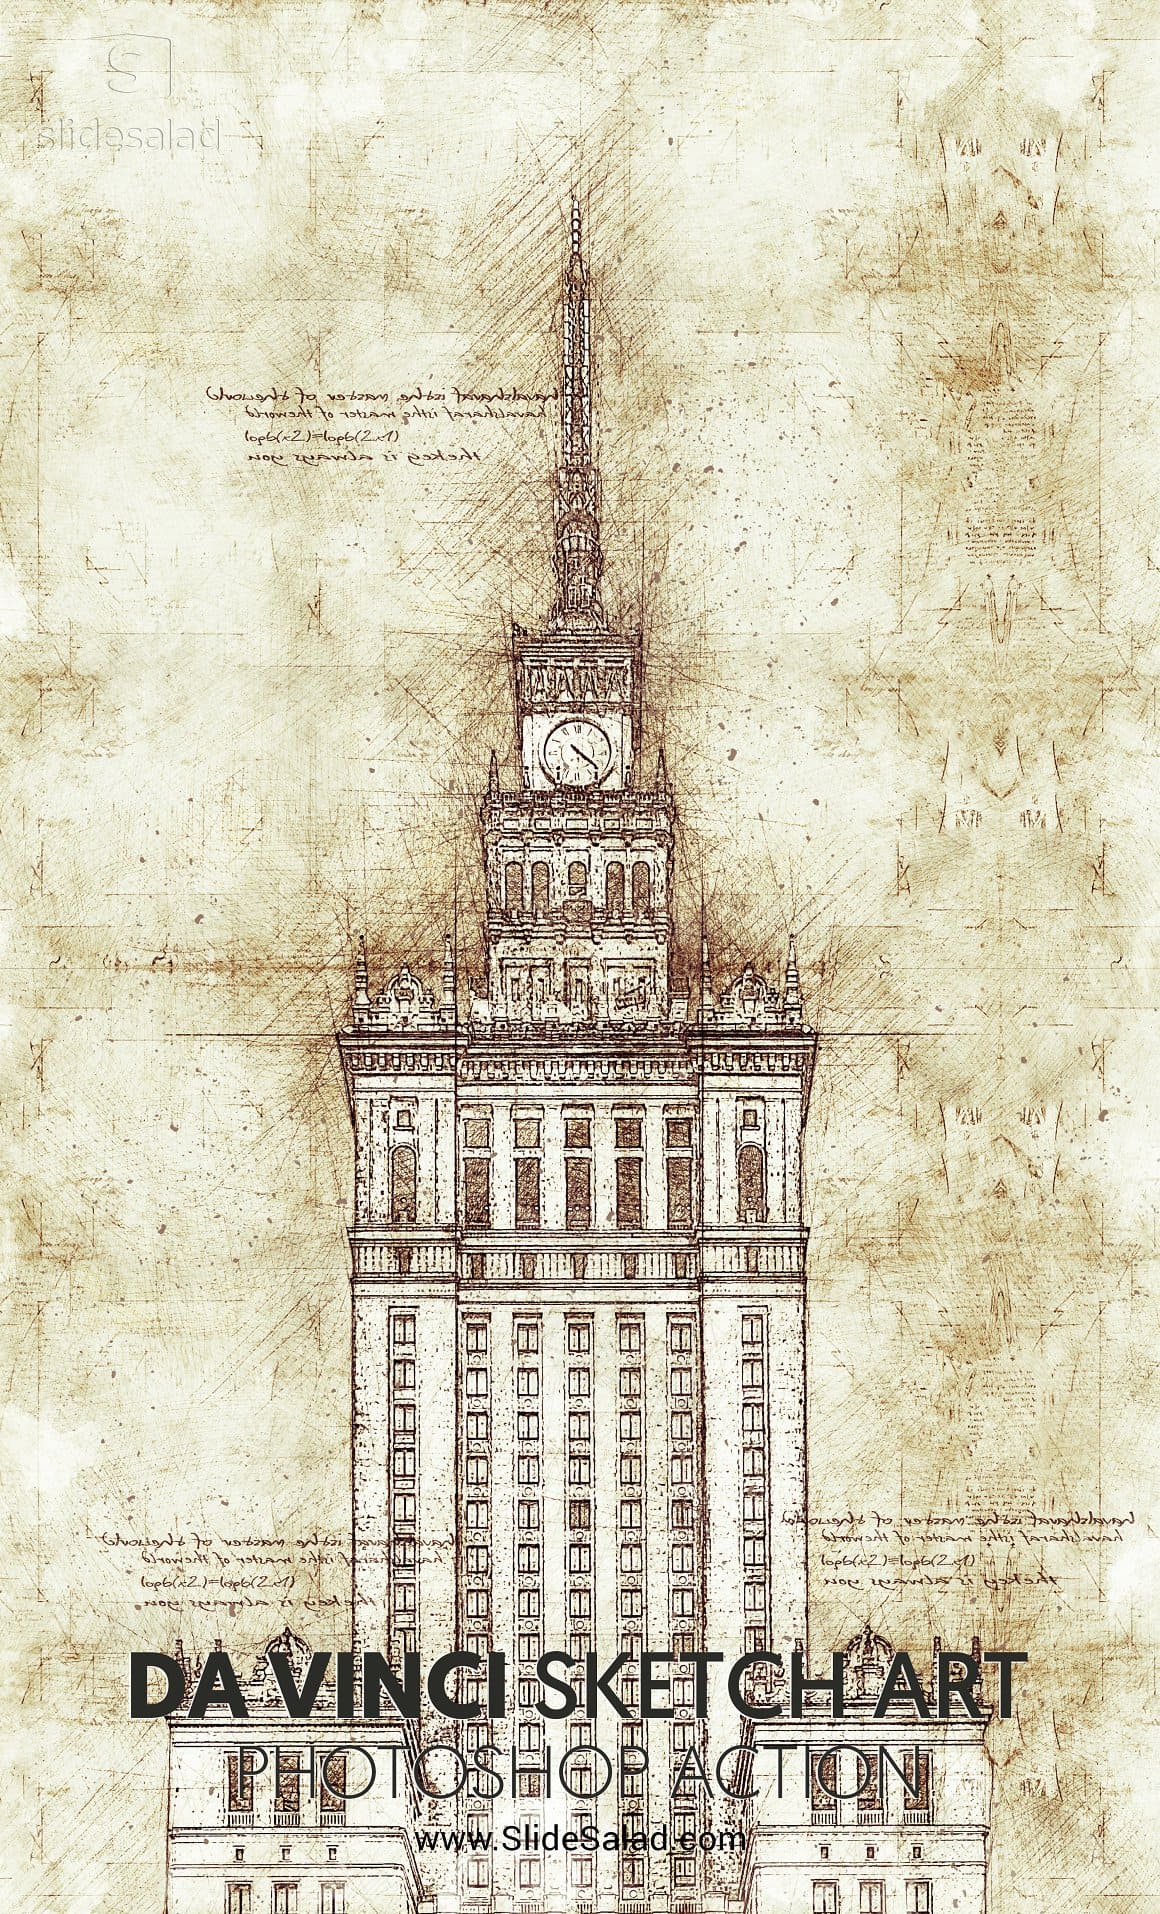 Drawing of an architectural structure using Da Vinci Sketch Art Photoshop Action.